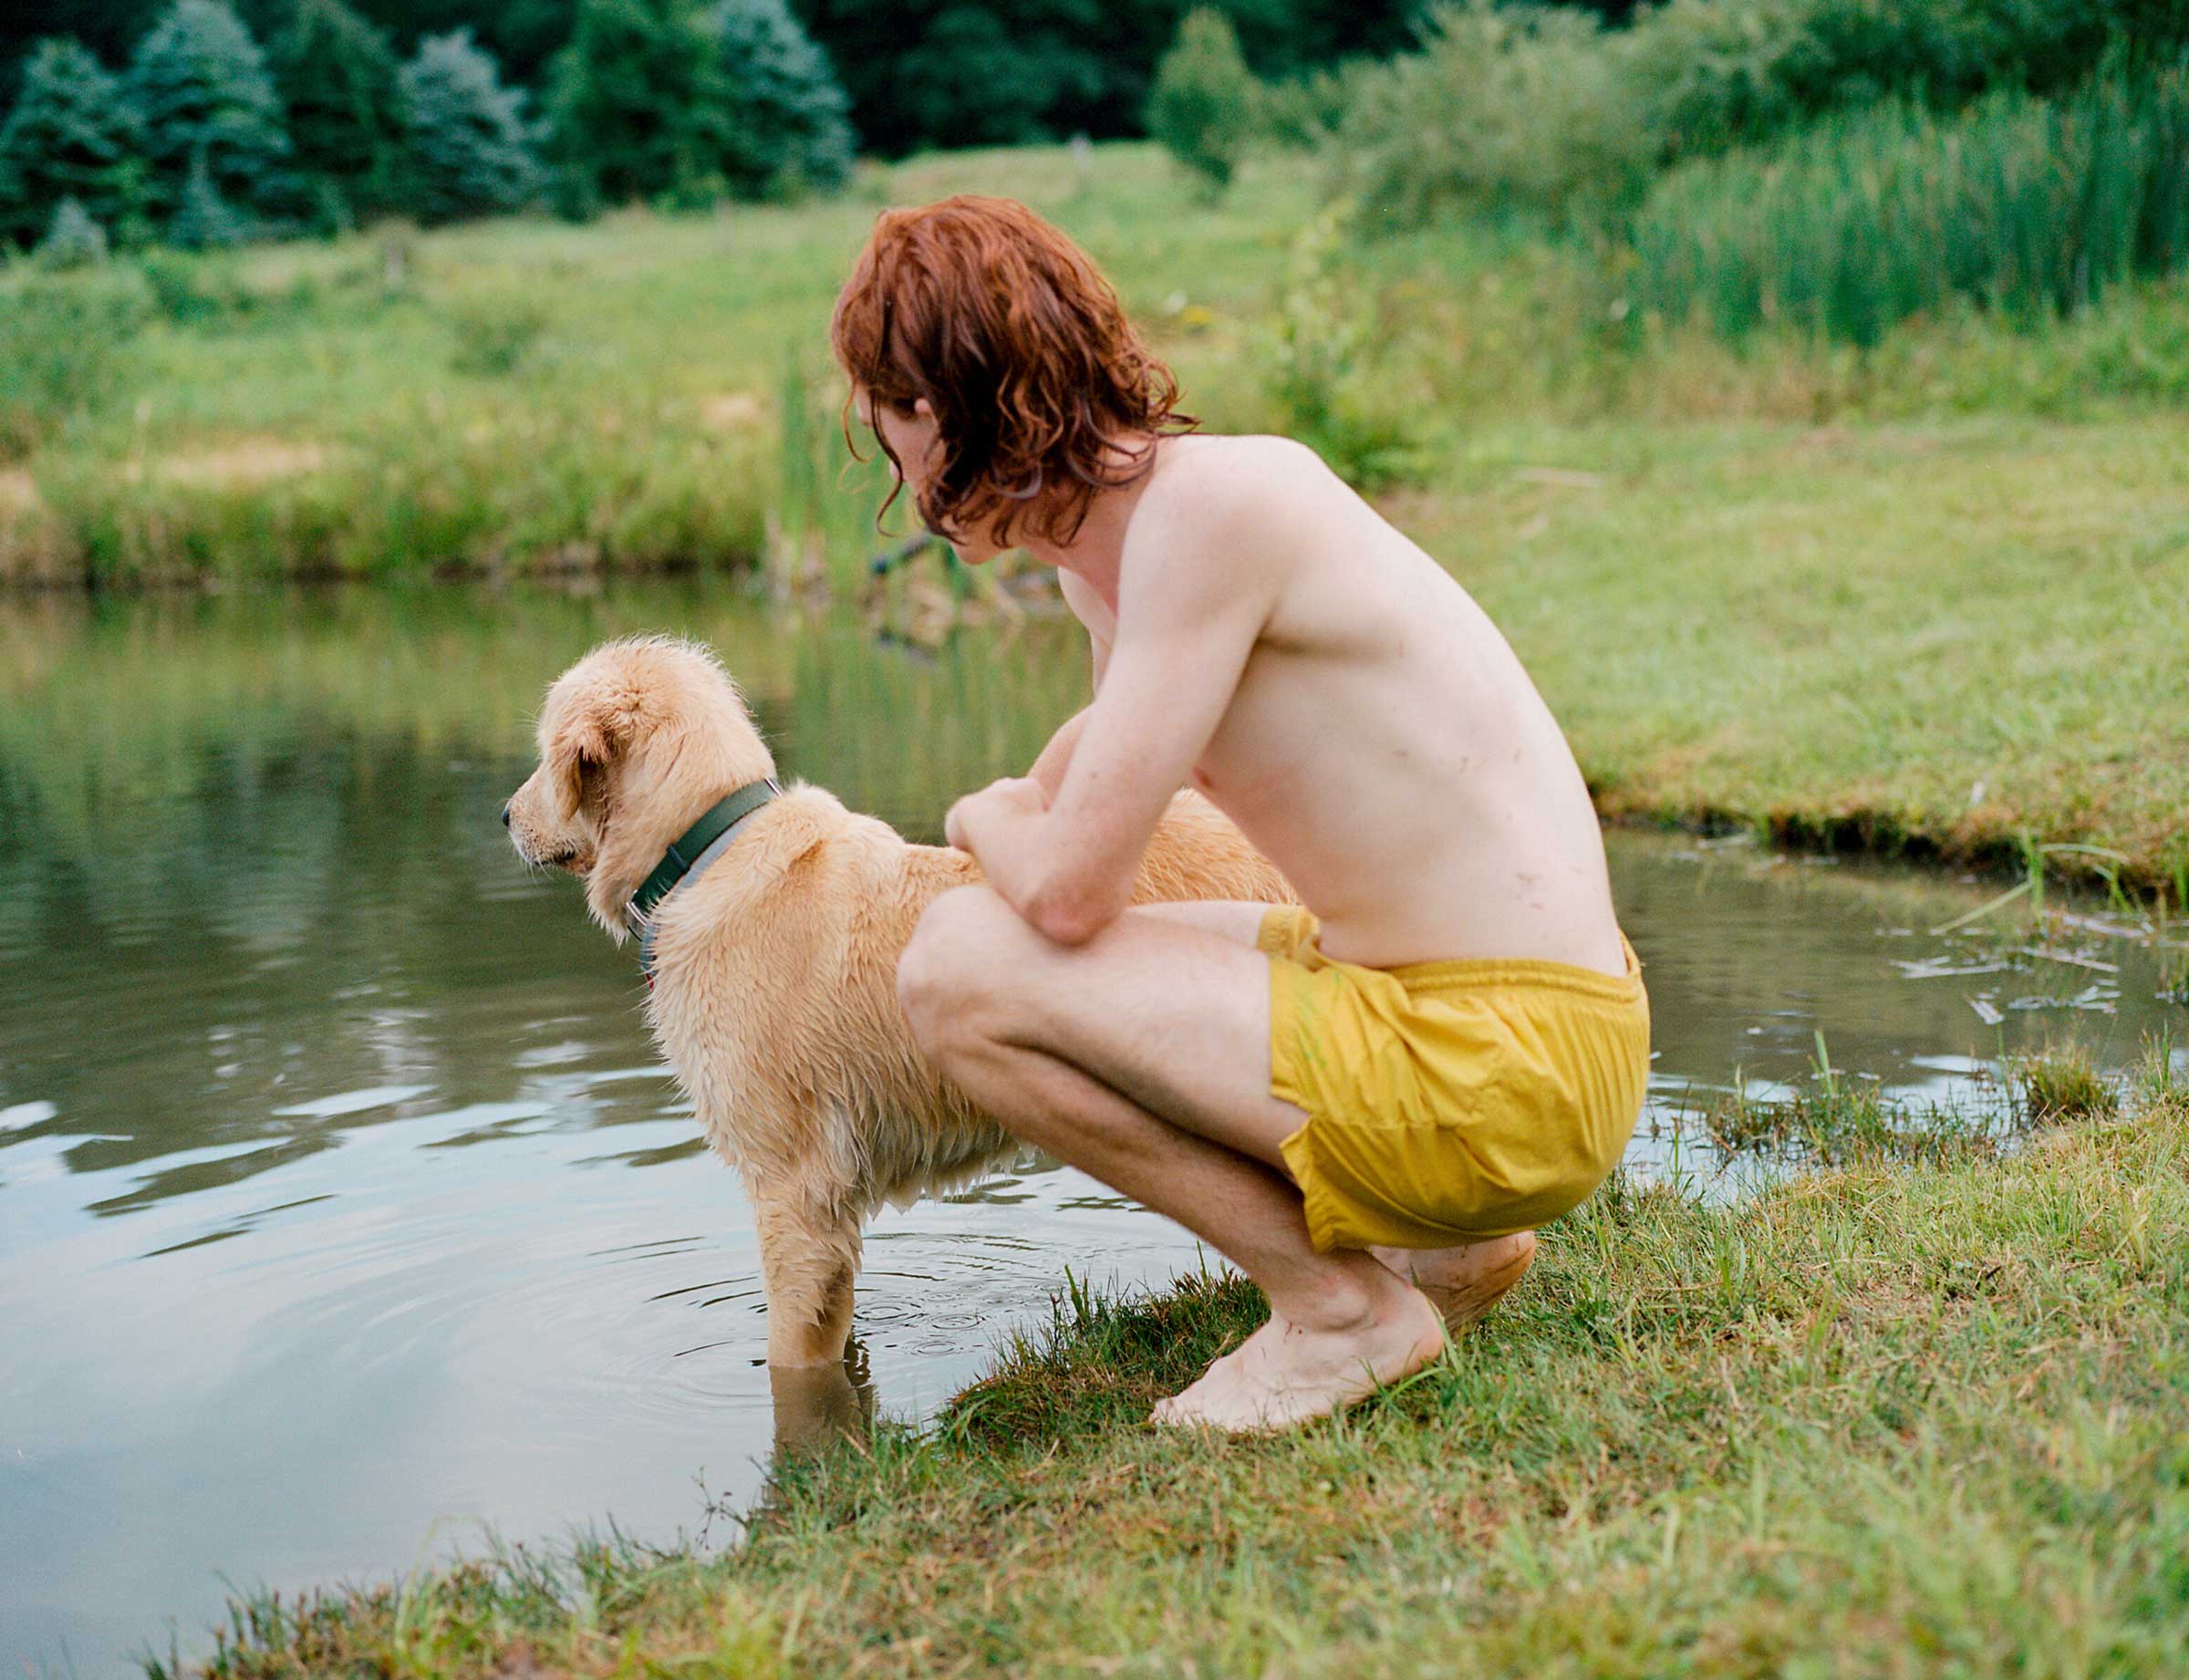 A person in swim trunks and a dog sit near a pond.